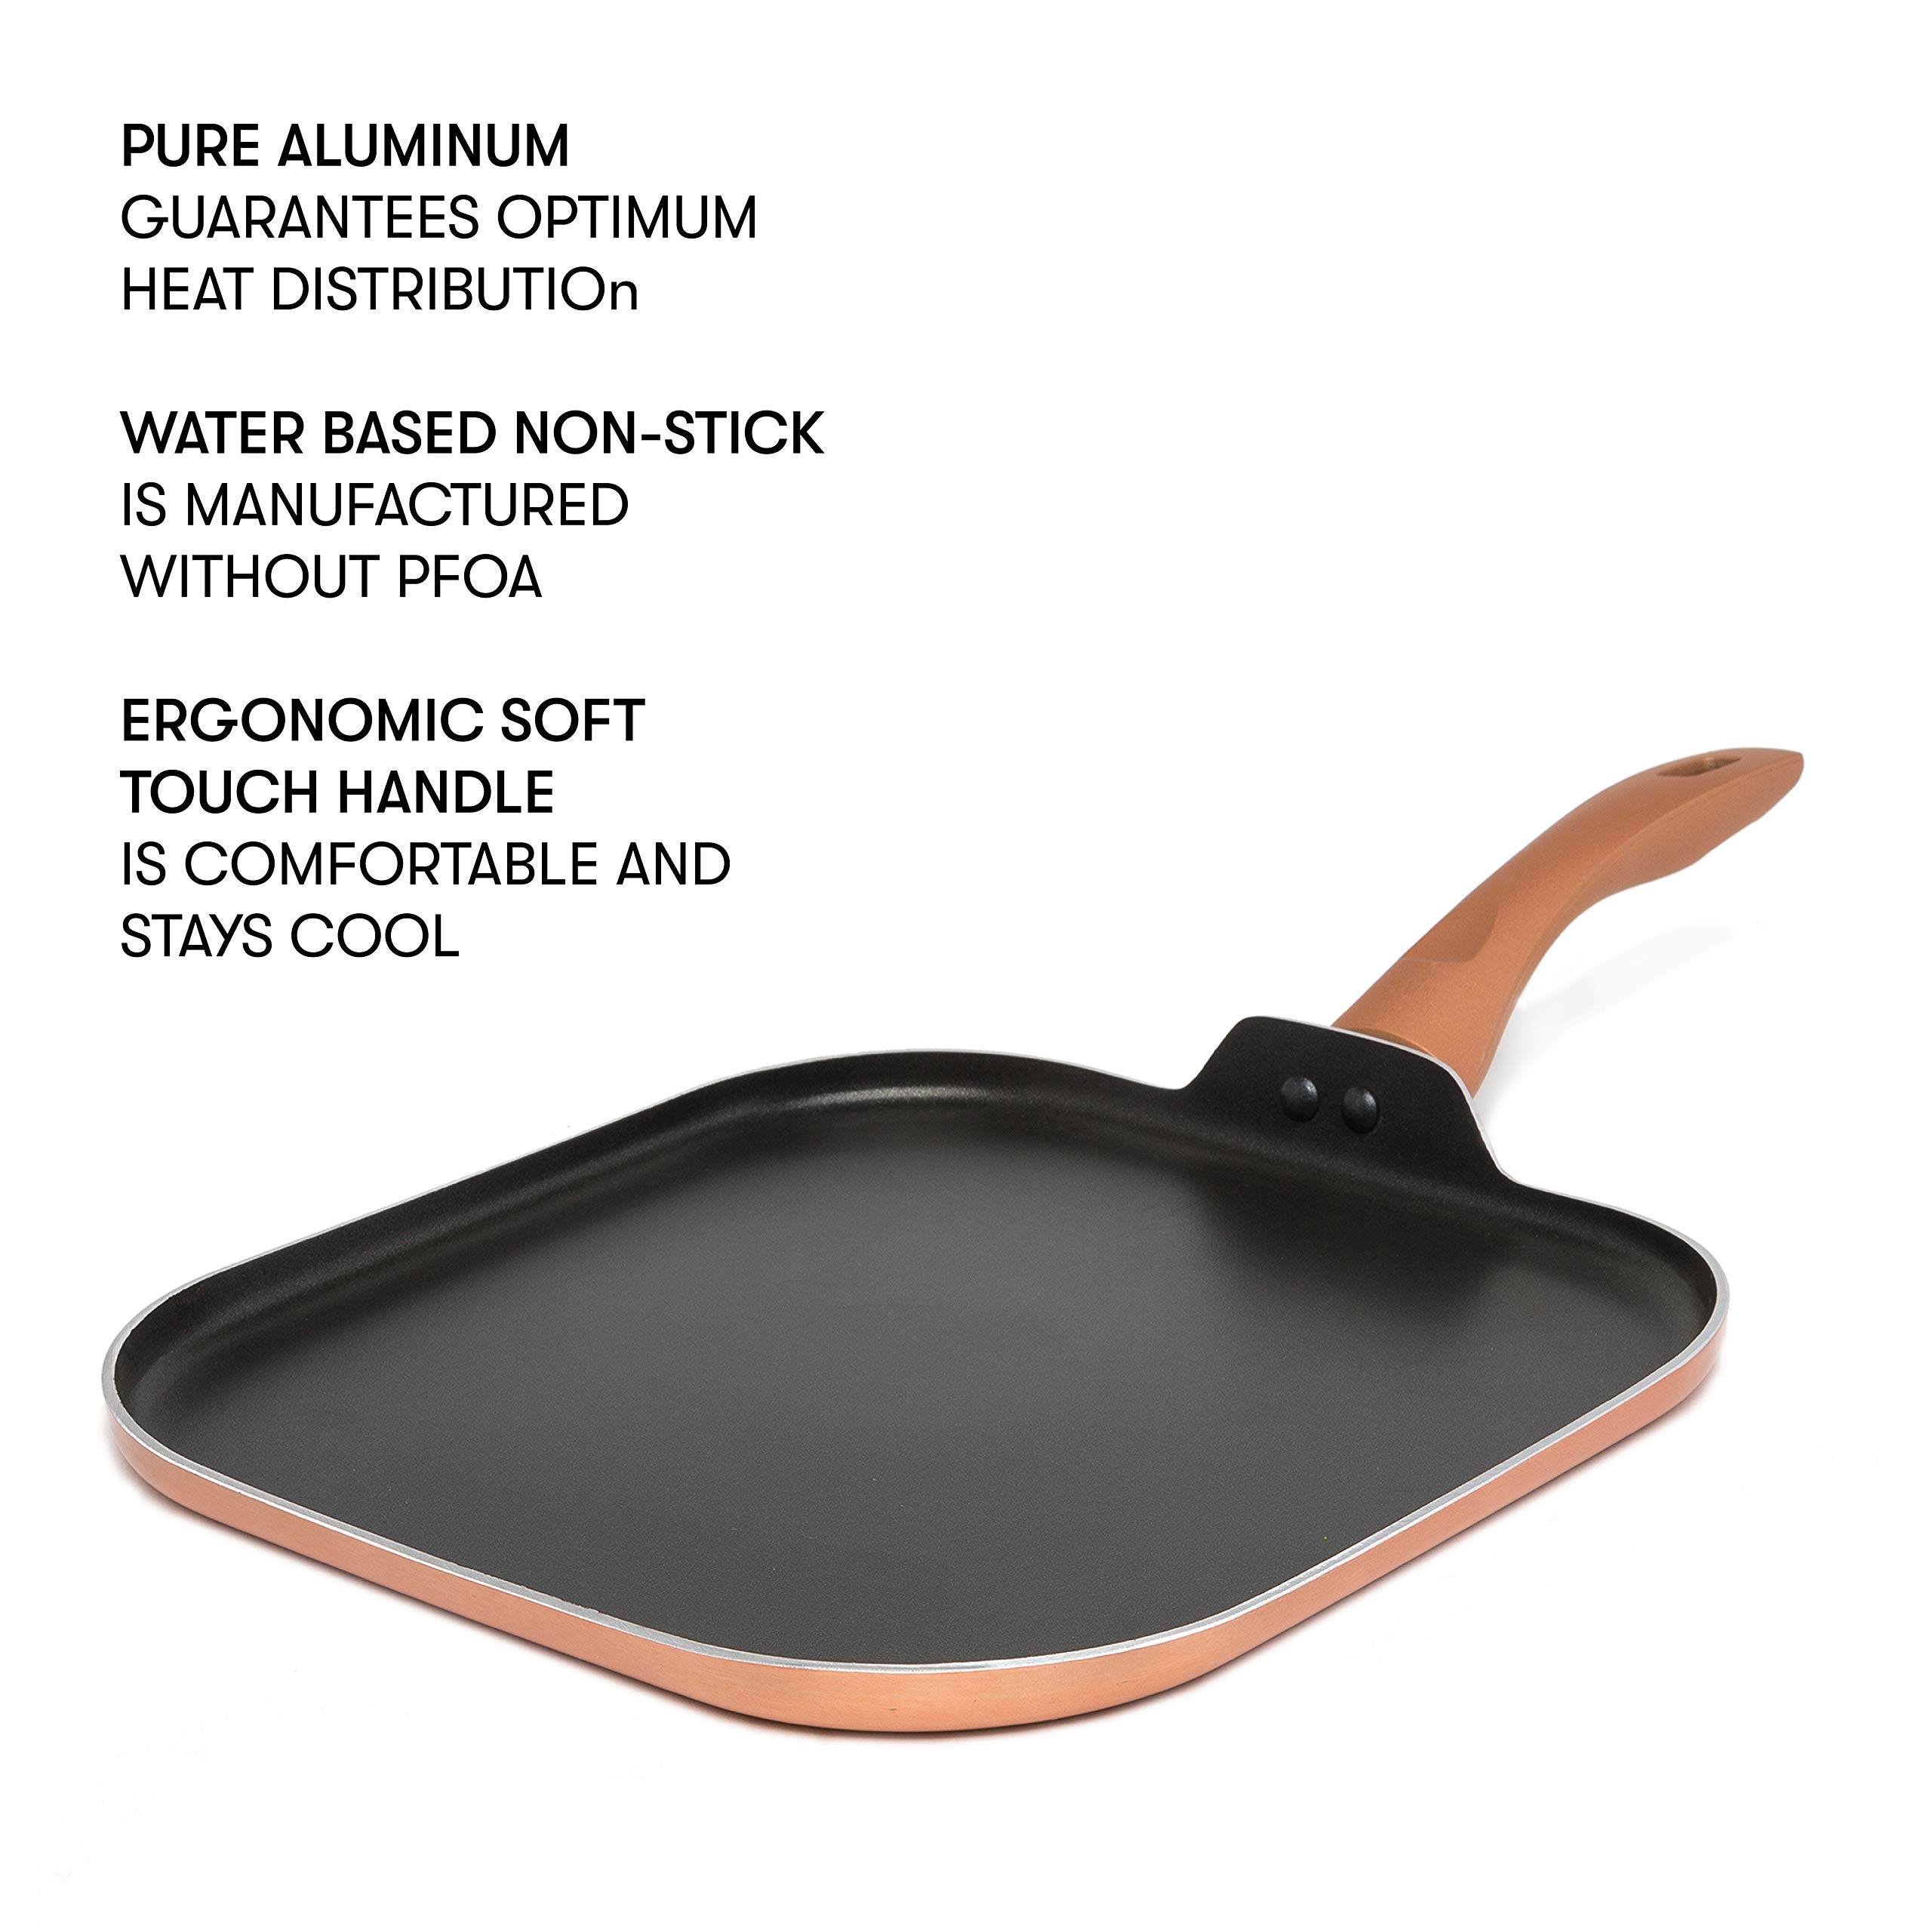 Cooking Light Dishwasher Safe, Silicone Handle, Specialty Cookware for Family, 11 Inch Griddle, Copper